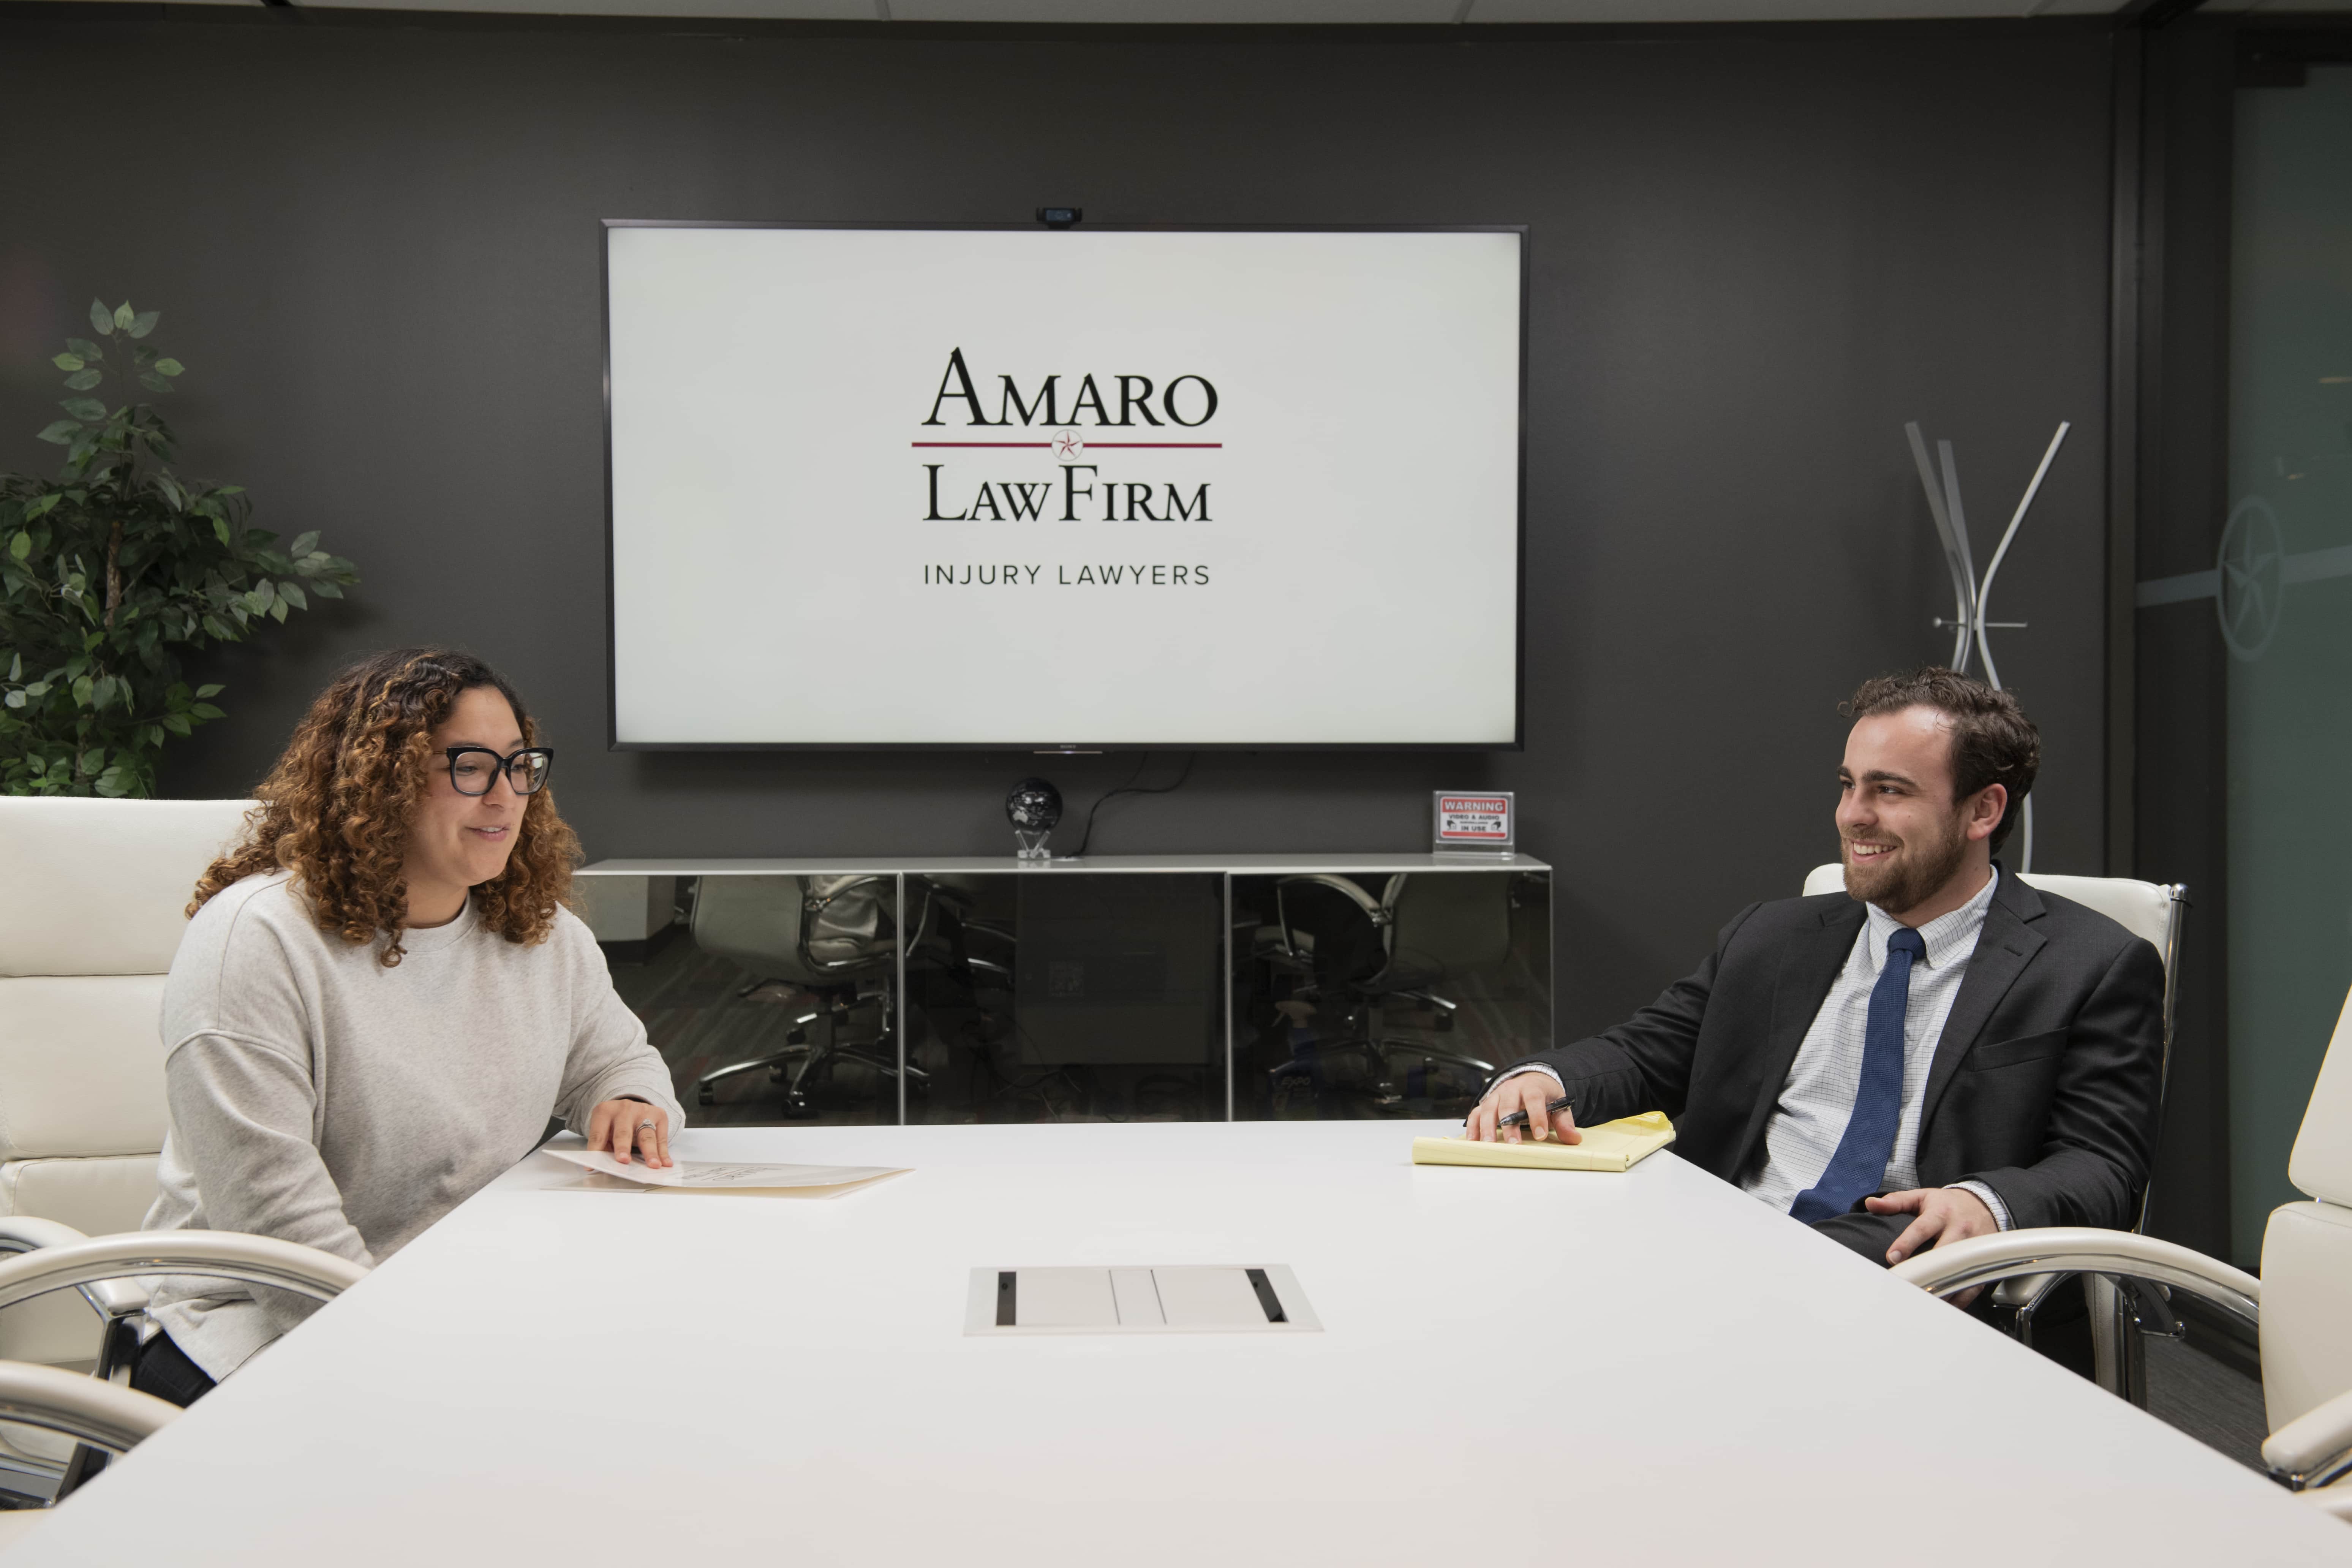 Amaro Law Firm Injury & Accident Lawyers - Dallas (TX 75220), US, personal injury attorney